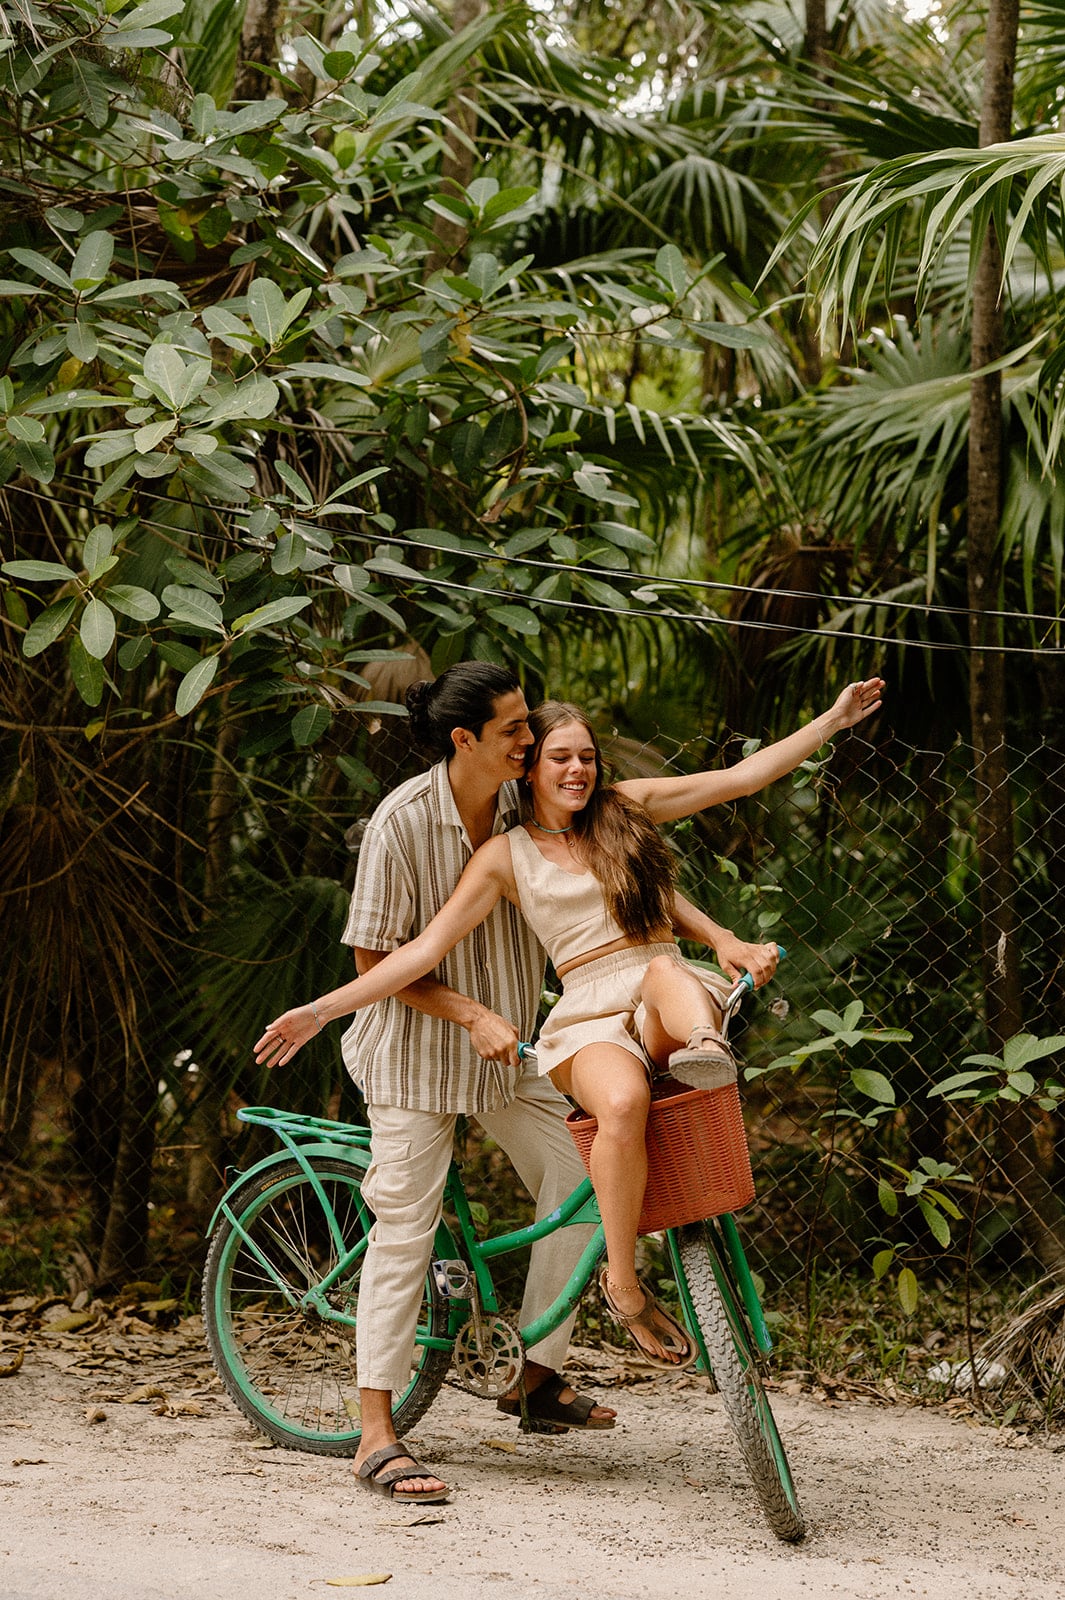 A woman and man share a bike after their engagement on a tropical destination wedding trip